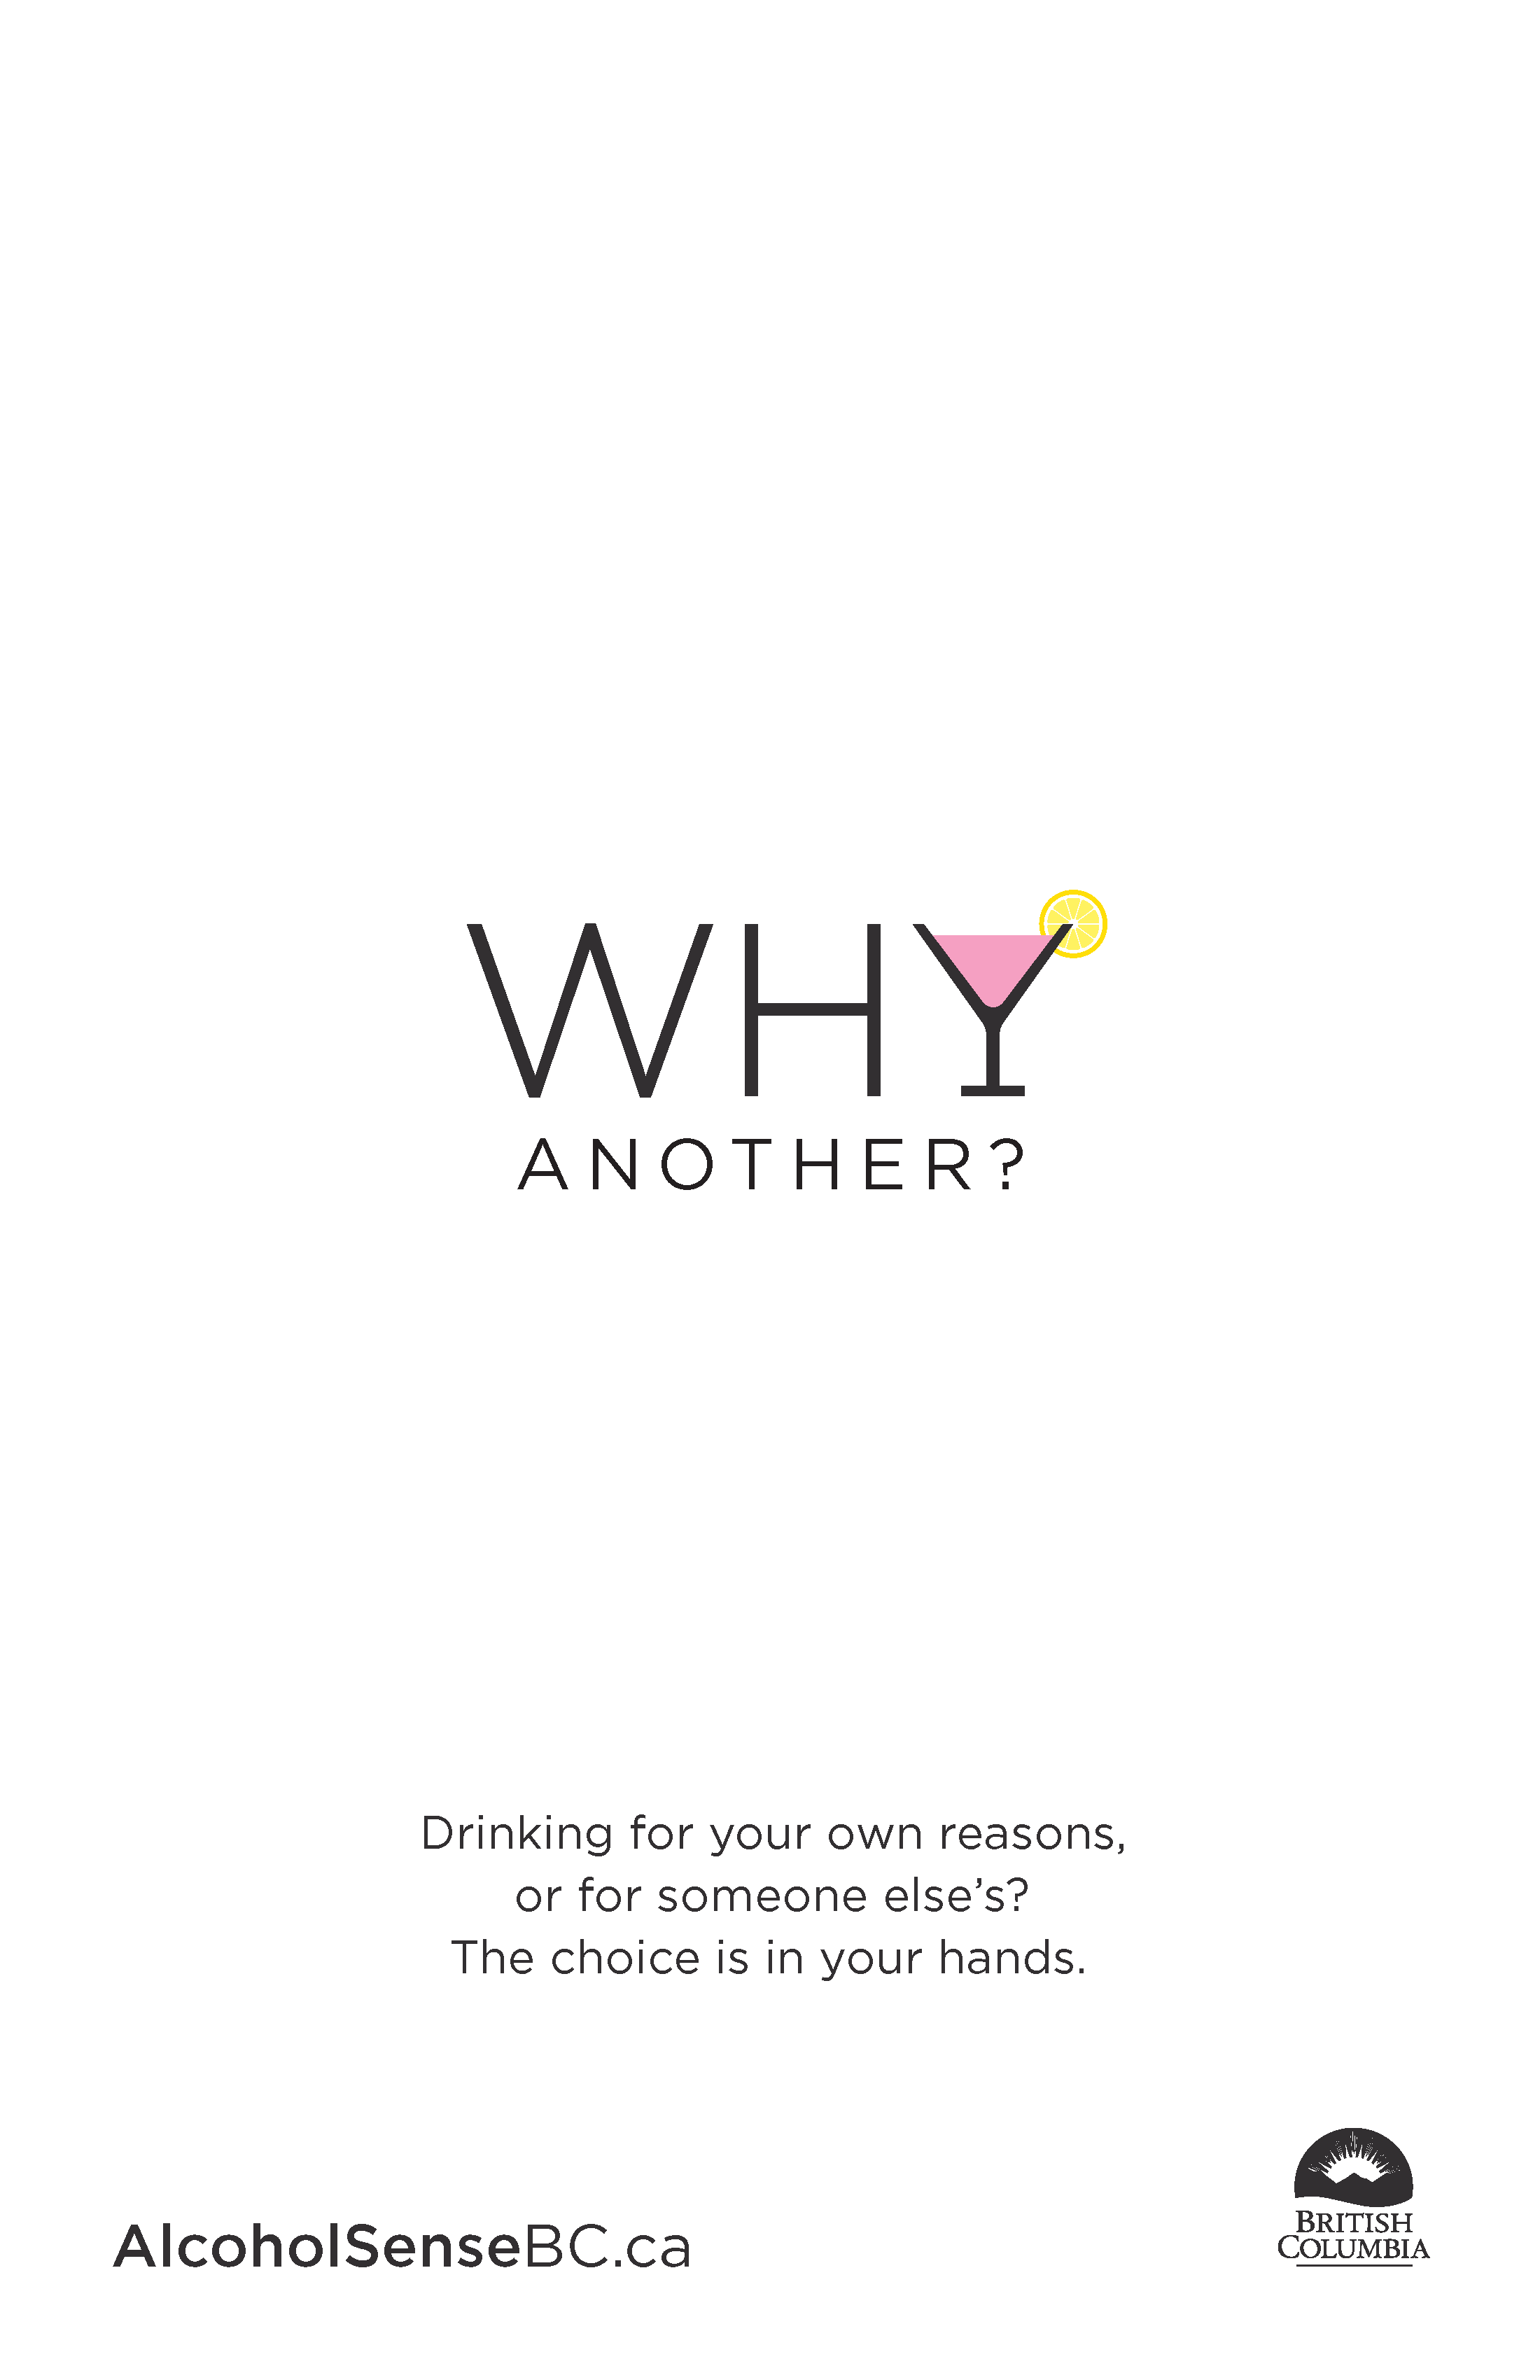 Alcohol sense social responsibility poster with white background.